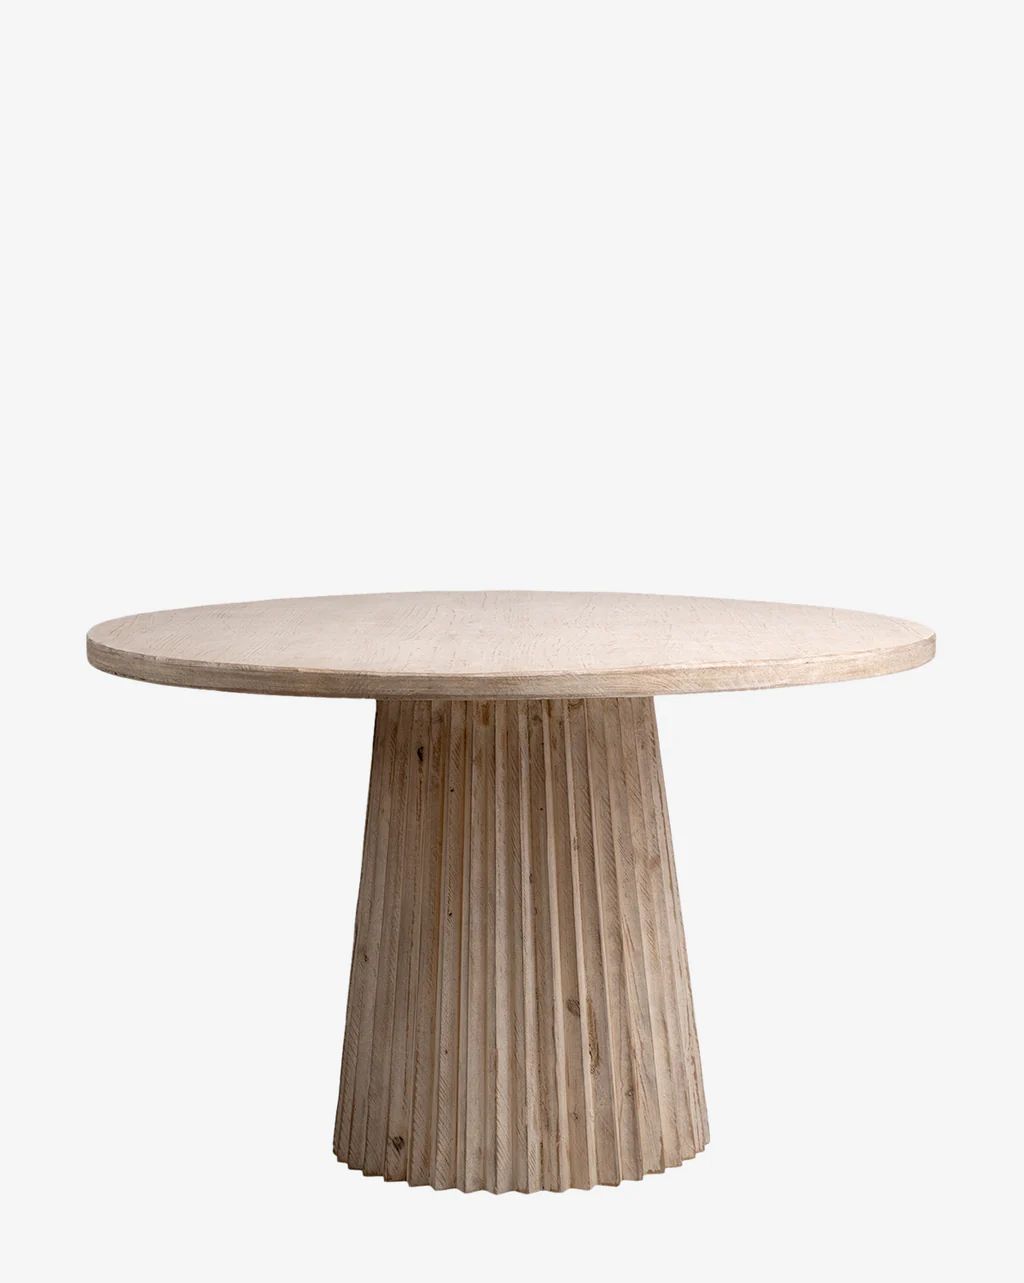 Bruckner Dining Table | McGee & Co.